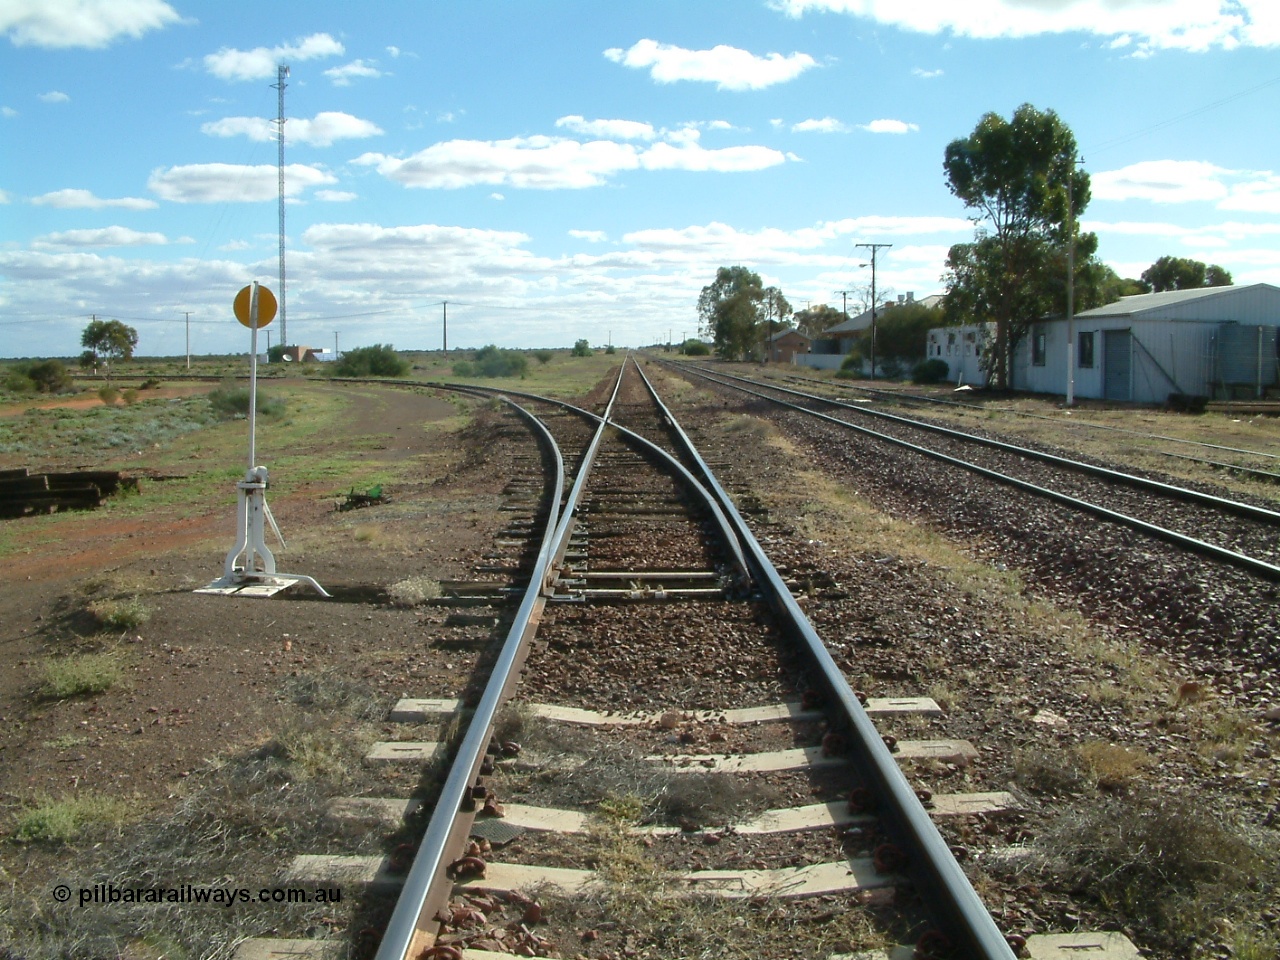 030415 154528
Tarcoola, at the 504.5 km, looking west along loop line, the eastern leg of the triangle running to the left, middle road is the Trans Australian Railway line while the right is the Central Australian Railway line. Tarcoola is the junction for the TAR and CAR railways situated 504 km from the 0 km datum at Coonamia. [url=https://goo.gl/maps/NmBNmrosE7e6d5gx8]GeoData location[/url]. 15th April 2003.
